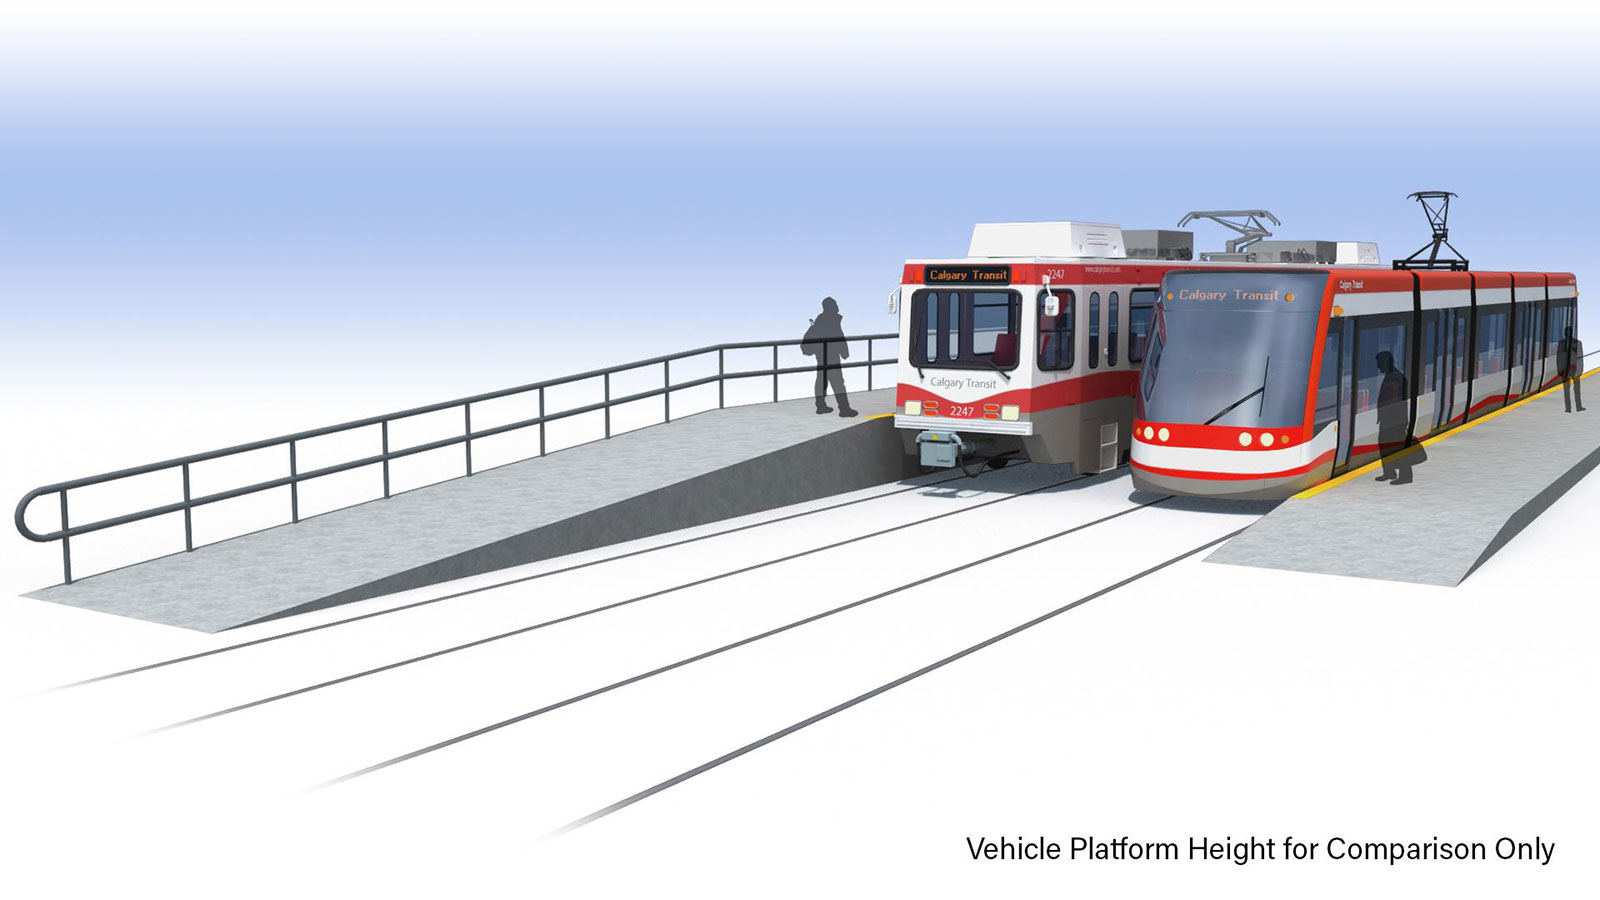 Red and Blue Line LRV on left side, Green Line LRV on ride side showing the difference of height of platforms.